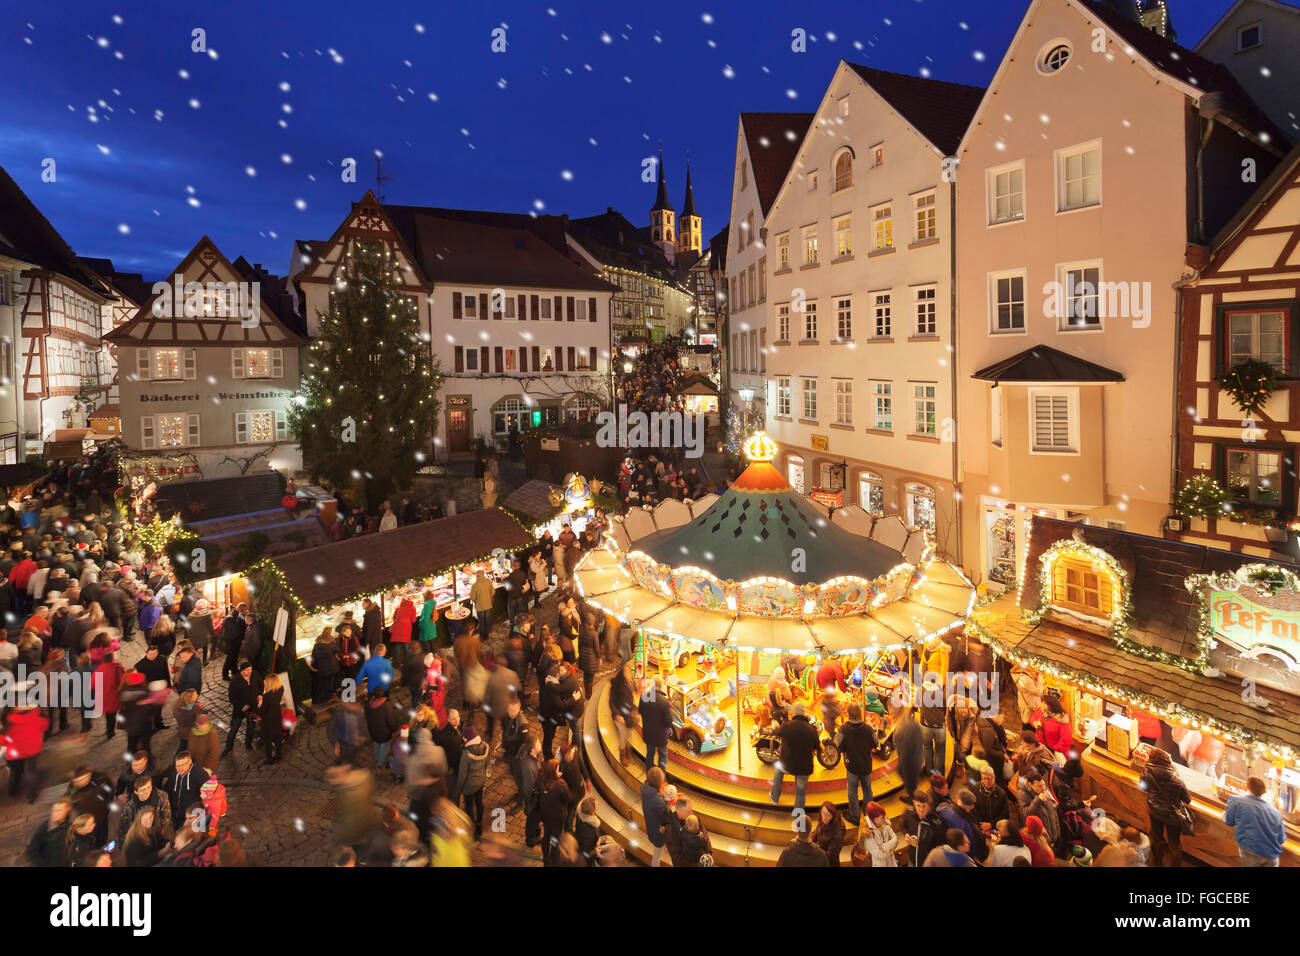 Christmas market on the main road, Bad Wimpfen, Baden-Württemberg, Germany Stock Photo